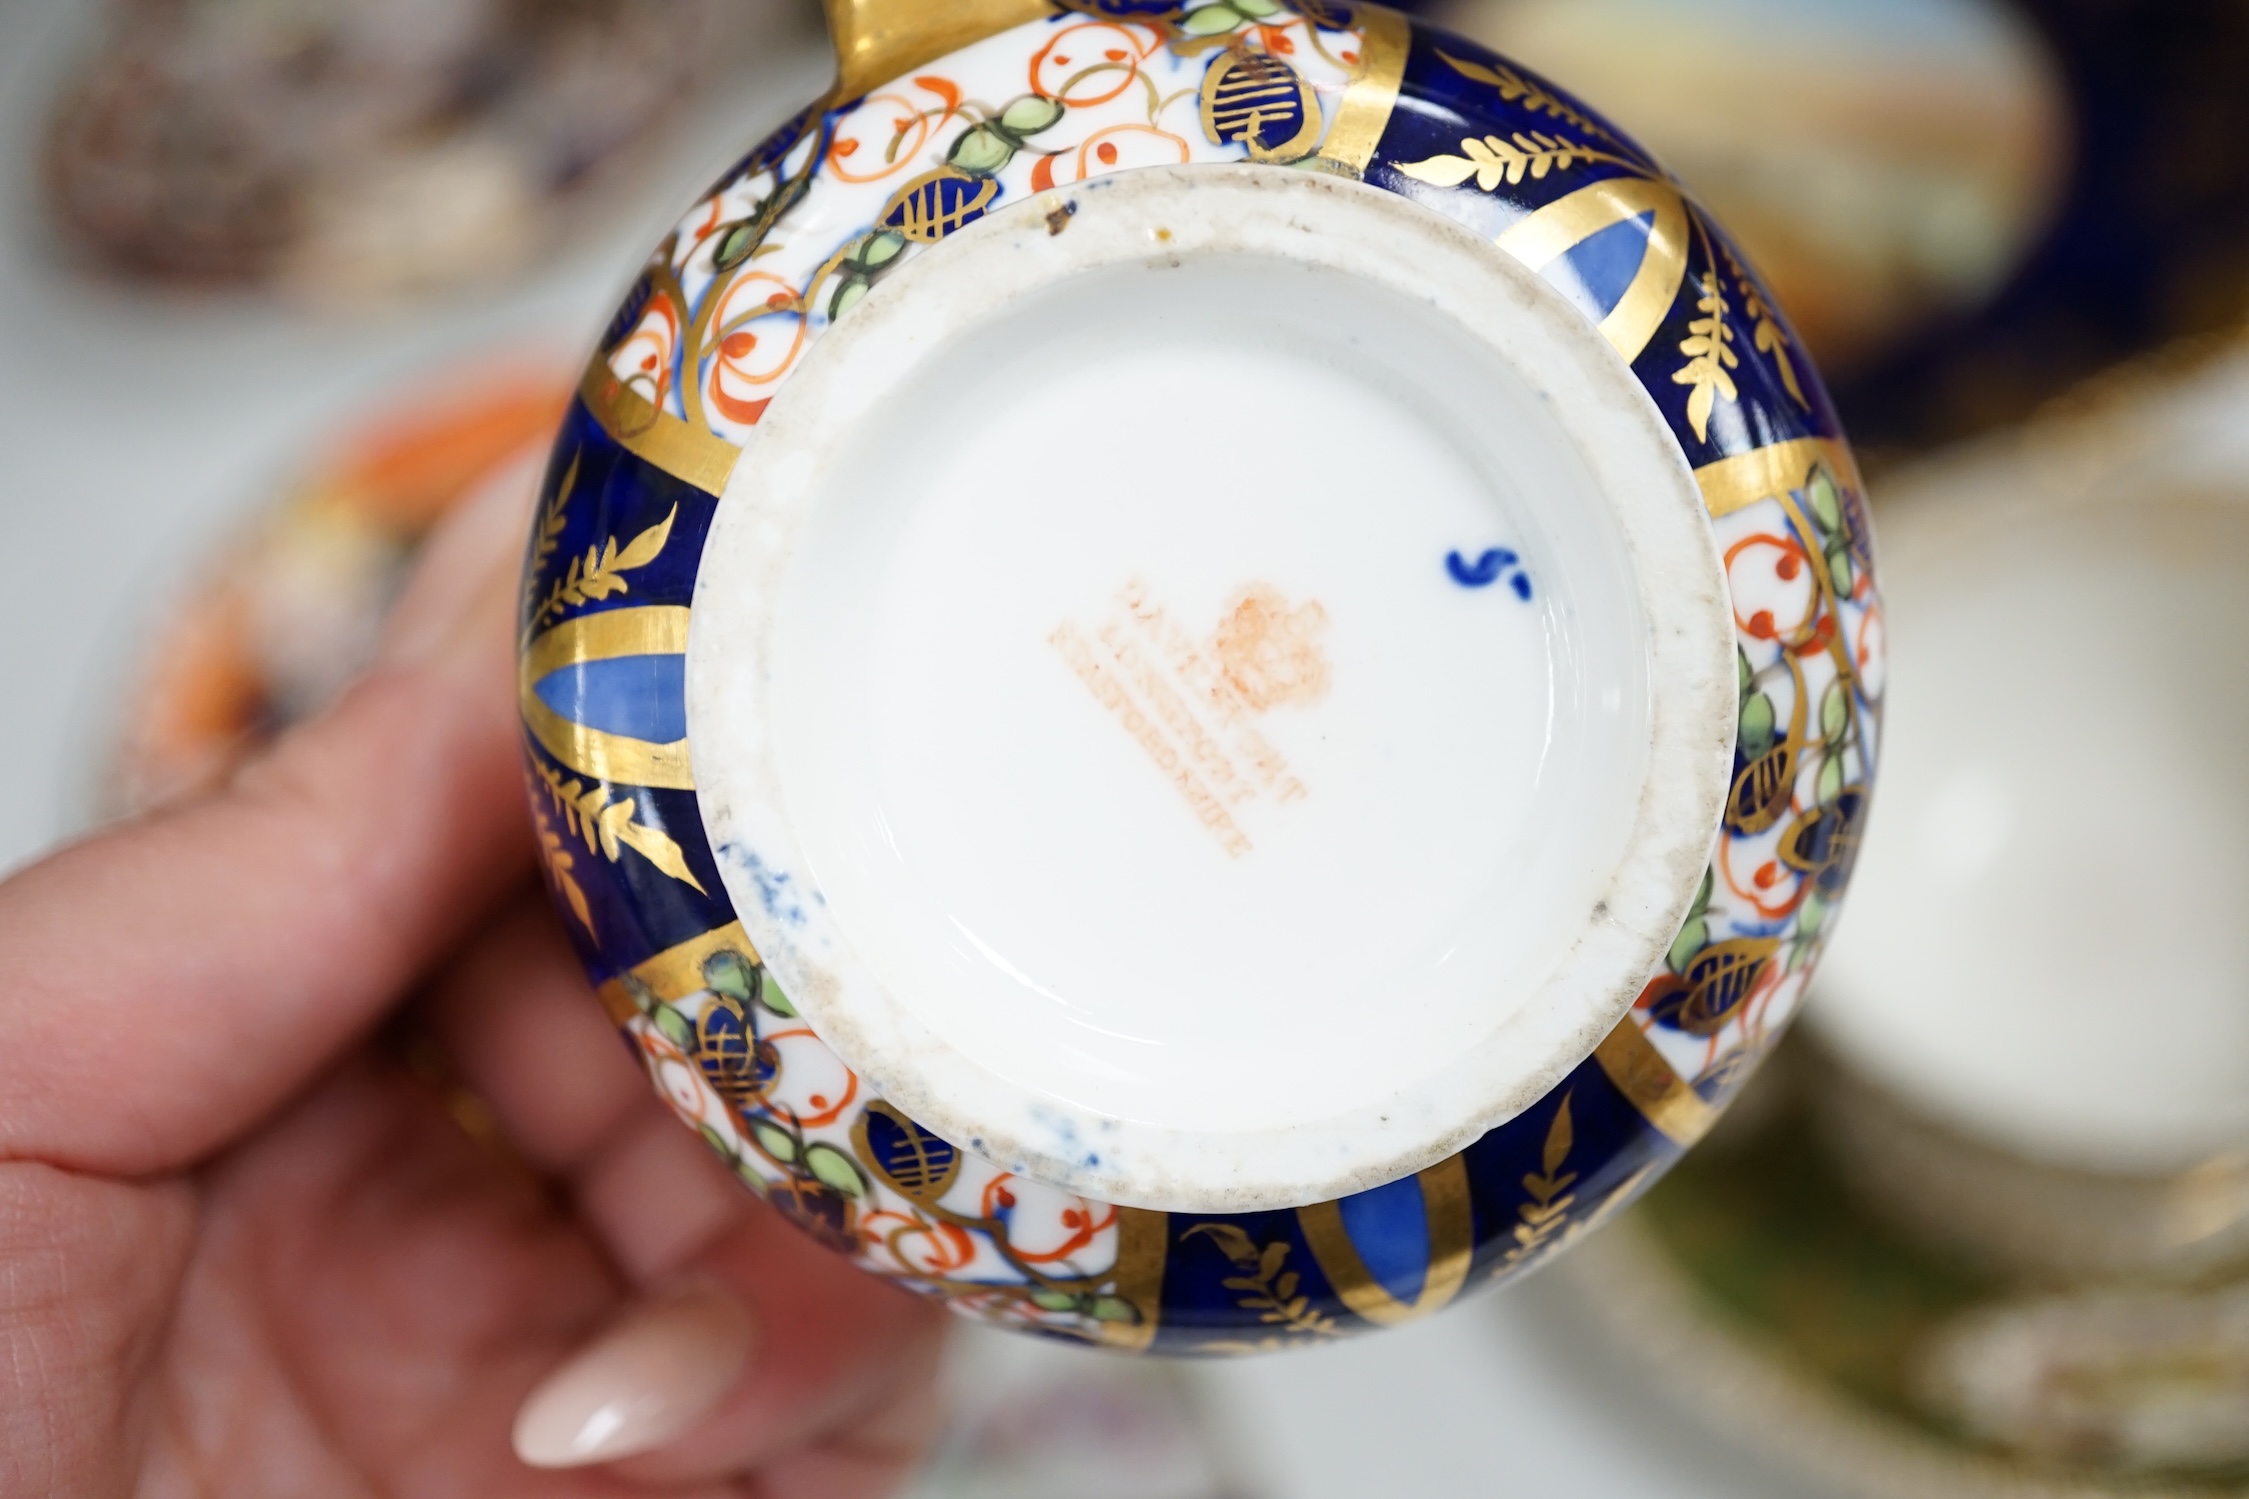 A collection of 19th century and later porcelain to include Aynsley, Davenport, Royal Crown Derby and Spode, some Imari pattern, largest 23cm in diameter. Condition - varies, mostly fair